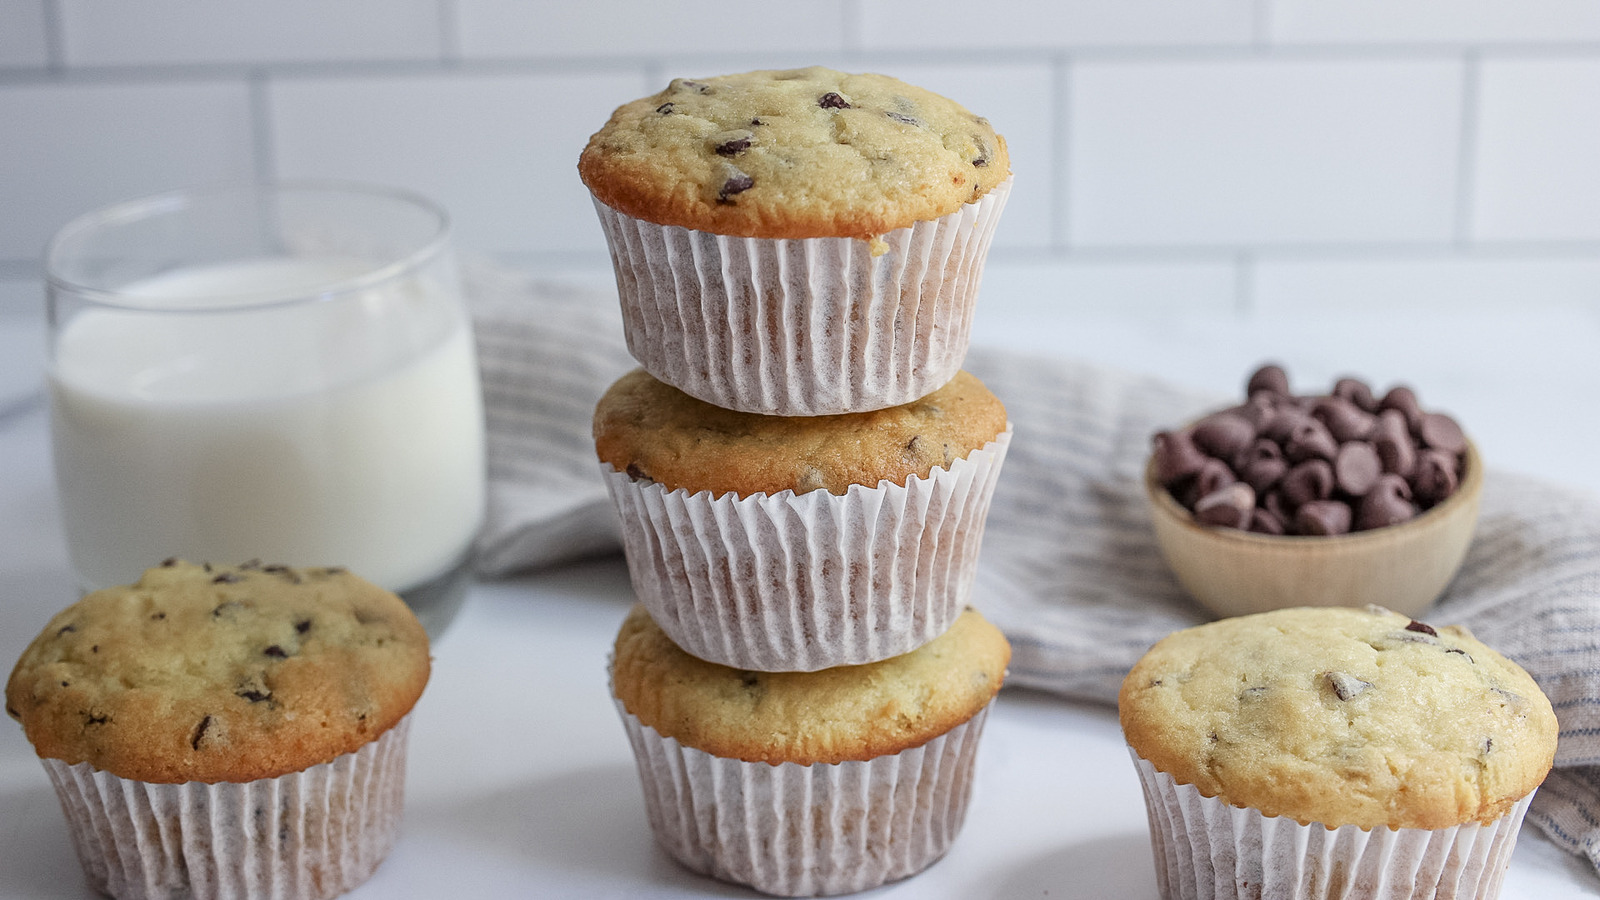 https://www.mashed.com/img/gallery/the-unexpected-ingredient-that-will-make-your-muffins-extra-fluffy/l-intro-1663780432.jpg